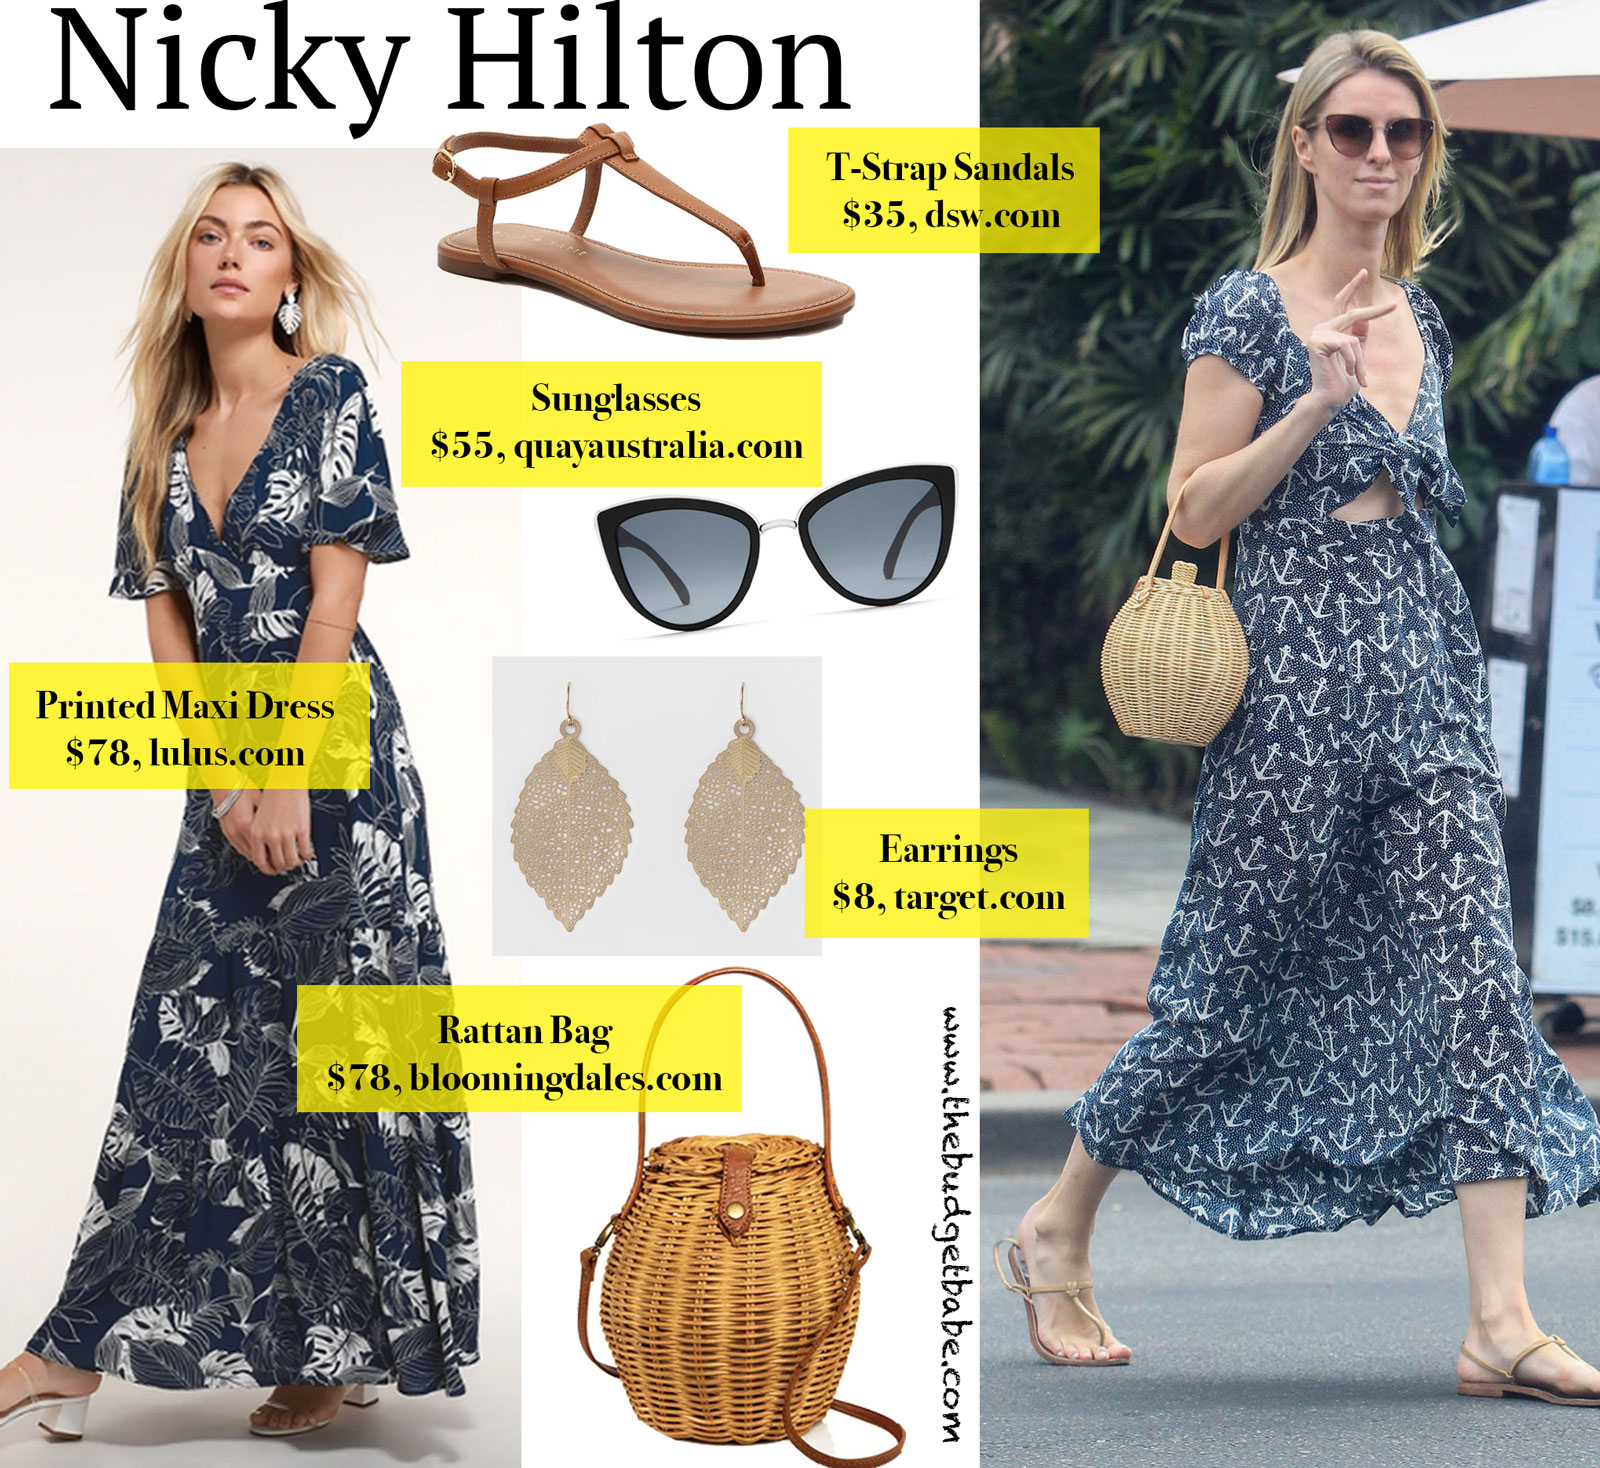 Nicky Hilton Maxi Dress and Rattan Bag Look for Less